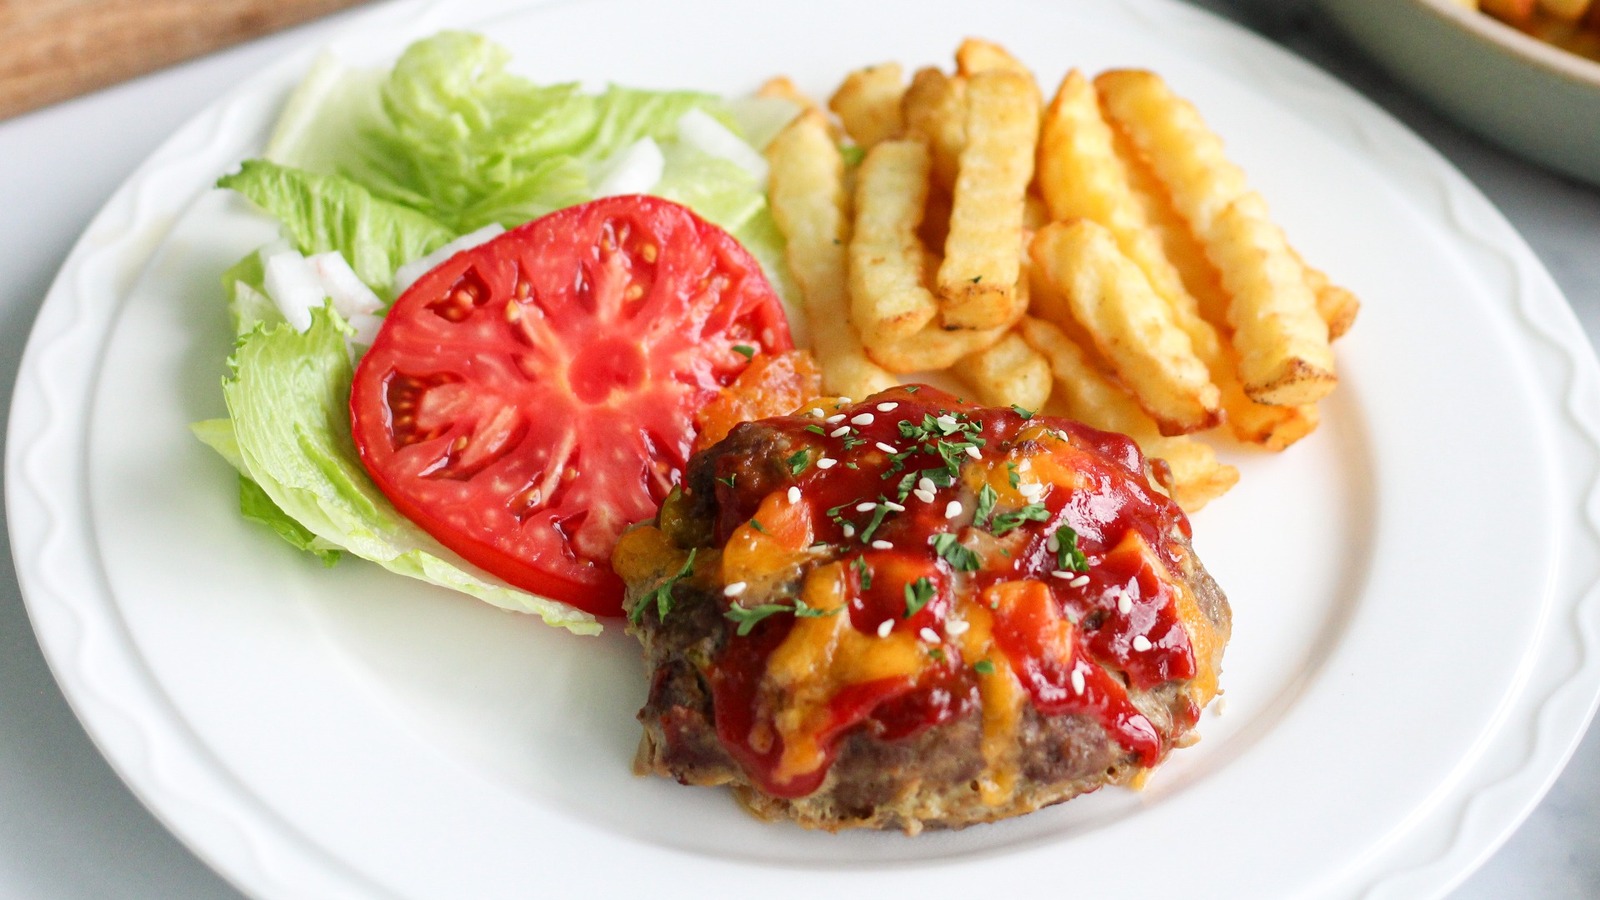 https://www.mashed.com/img/gallery/mini-cheeseburger-meatloaf-recipe/l-intro-1692193110.jpg